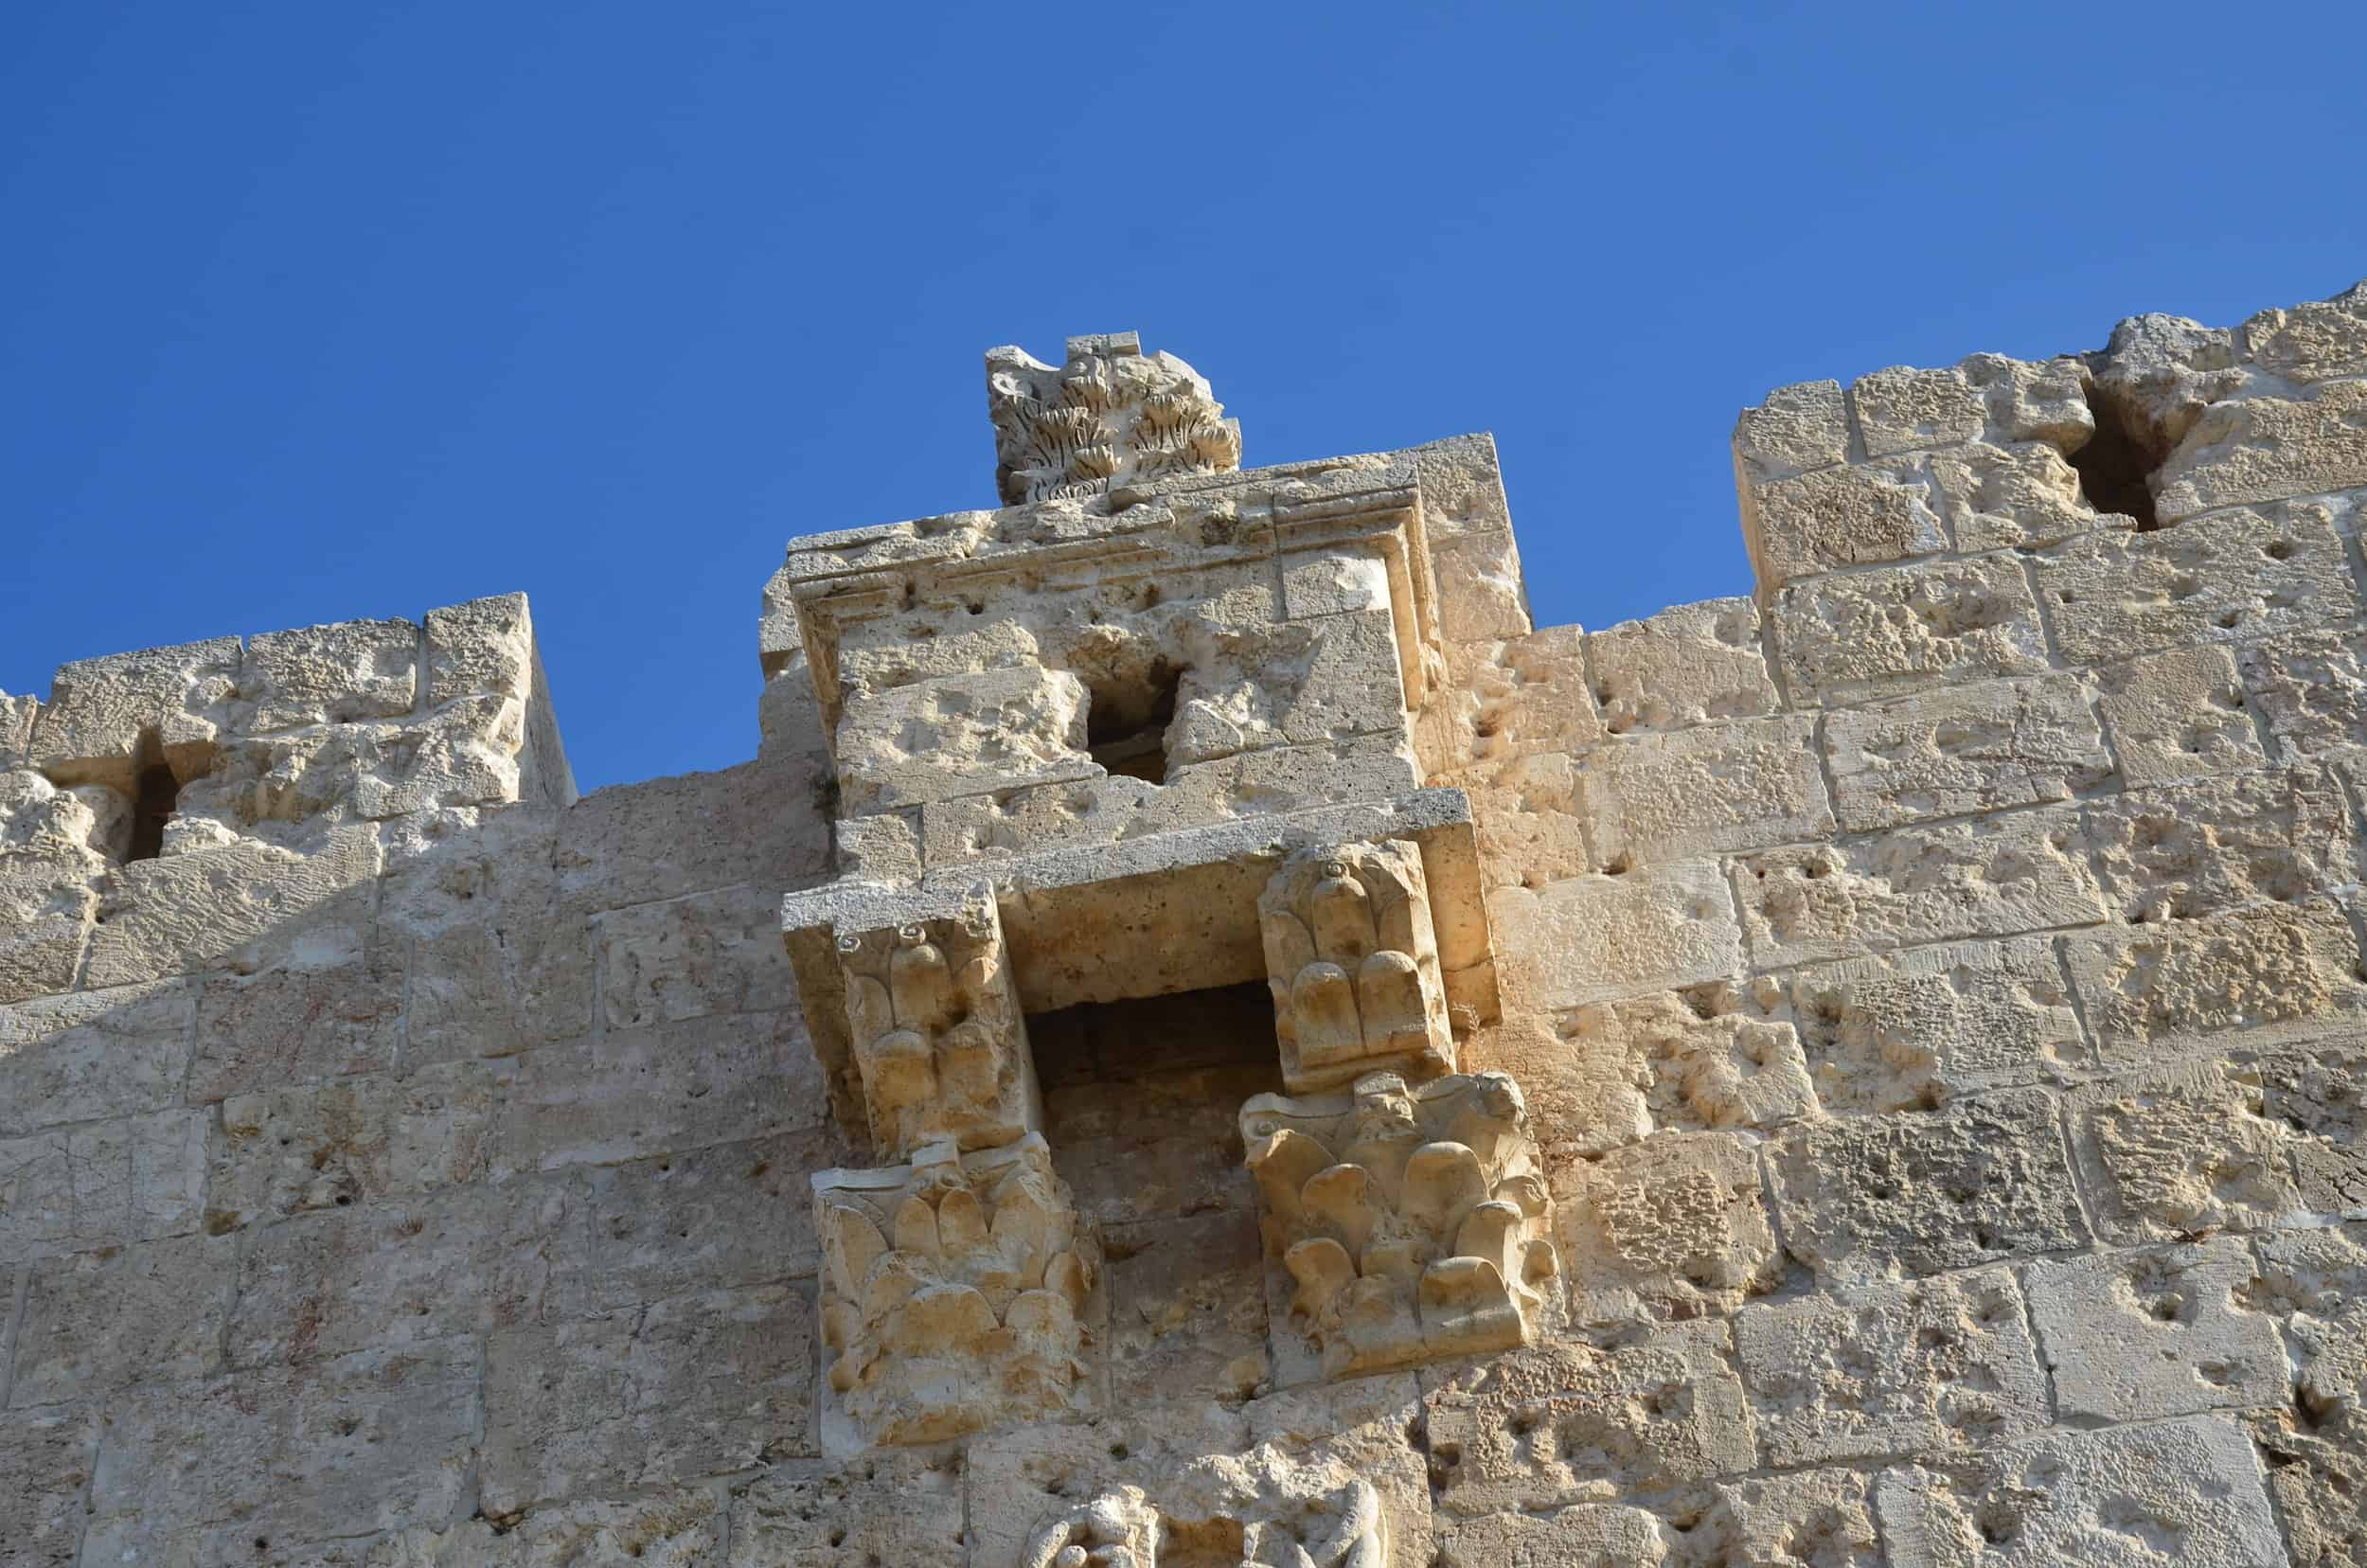 Top of the Zion Gate in the Armenian Quarter of Jerusalem